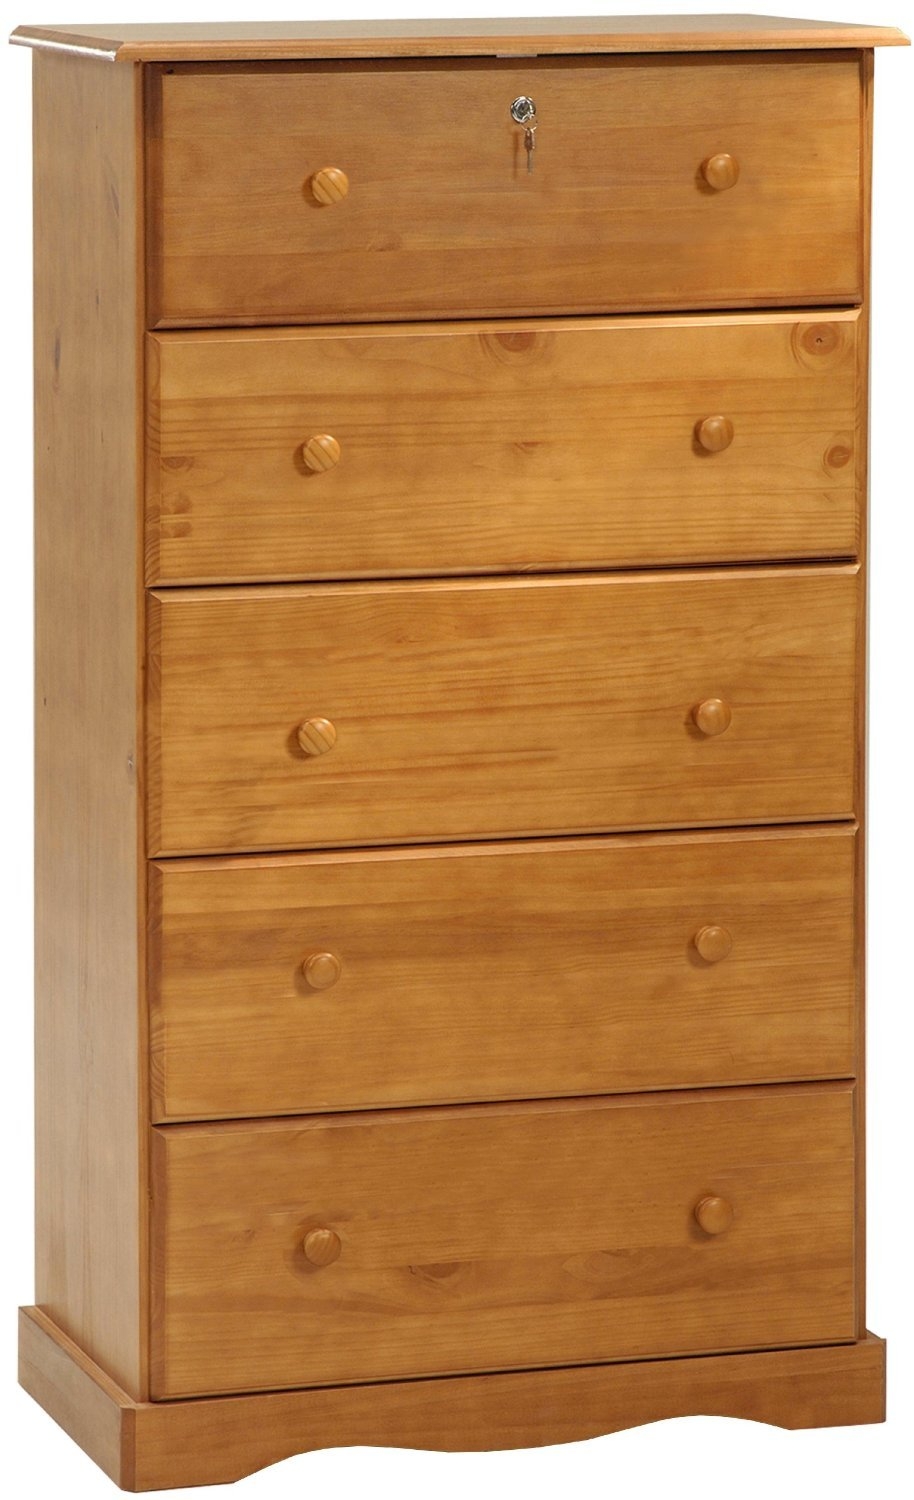 100% Solid Wood Chest of 5 Super Jumbo Drawers, Honey Pine, 32"w x 60"h x 17"d, Drawer Front 11"h, Side 9.5"h x 14"d. Optional Antique Brass Knobs Sold Separately. Requires Assembly.